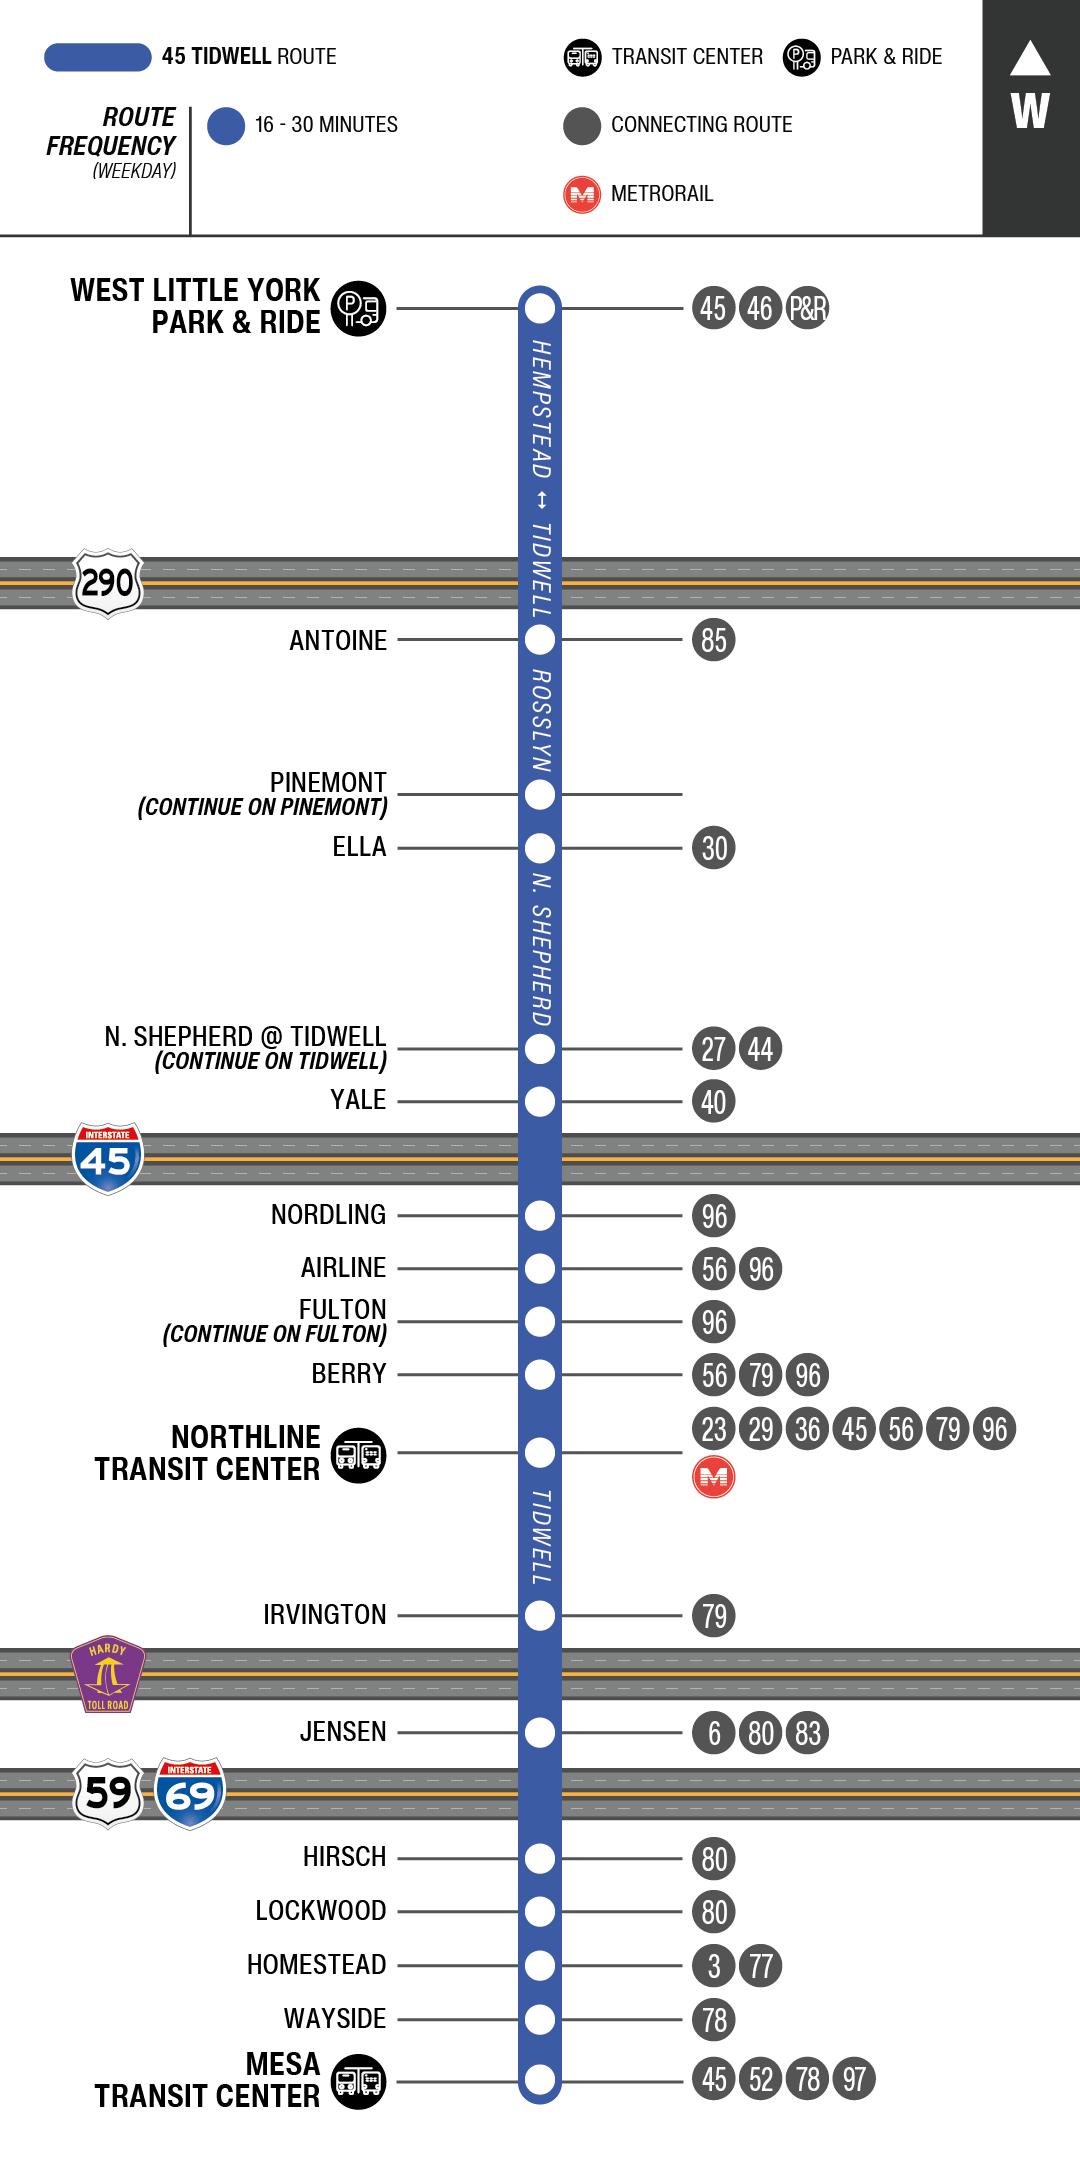 Route map for 45 Tidwell bus